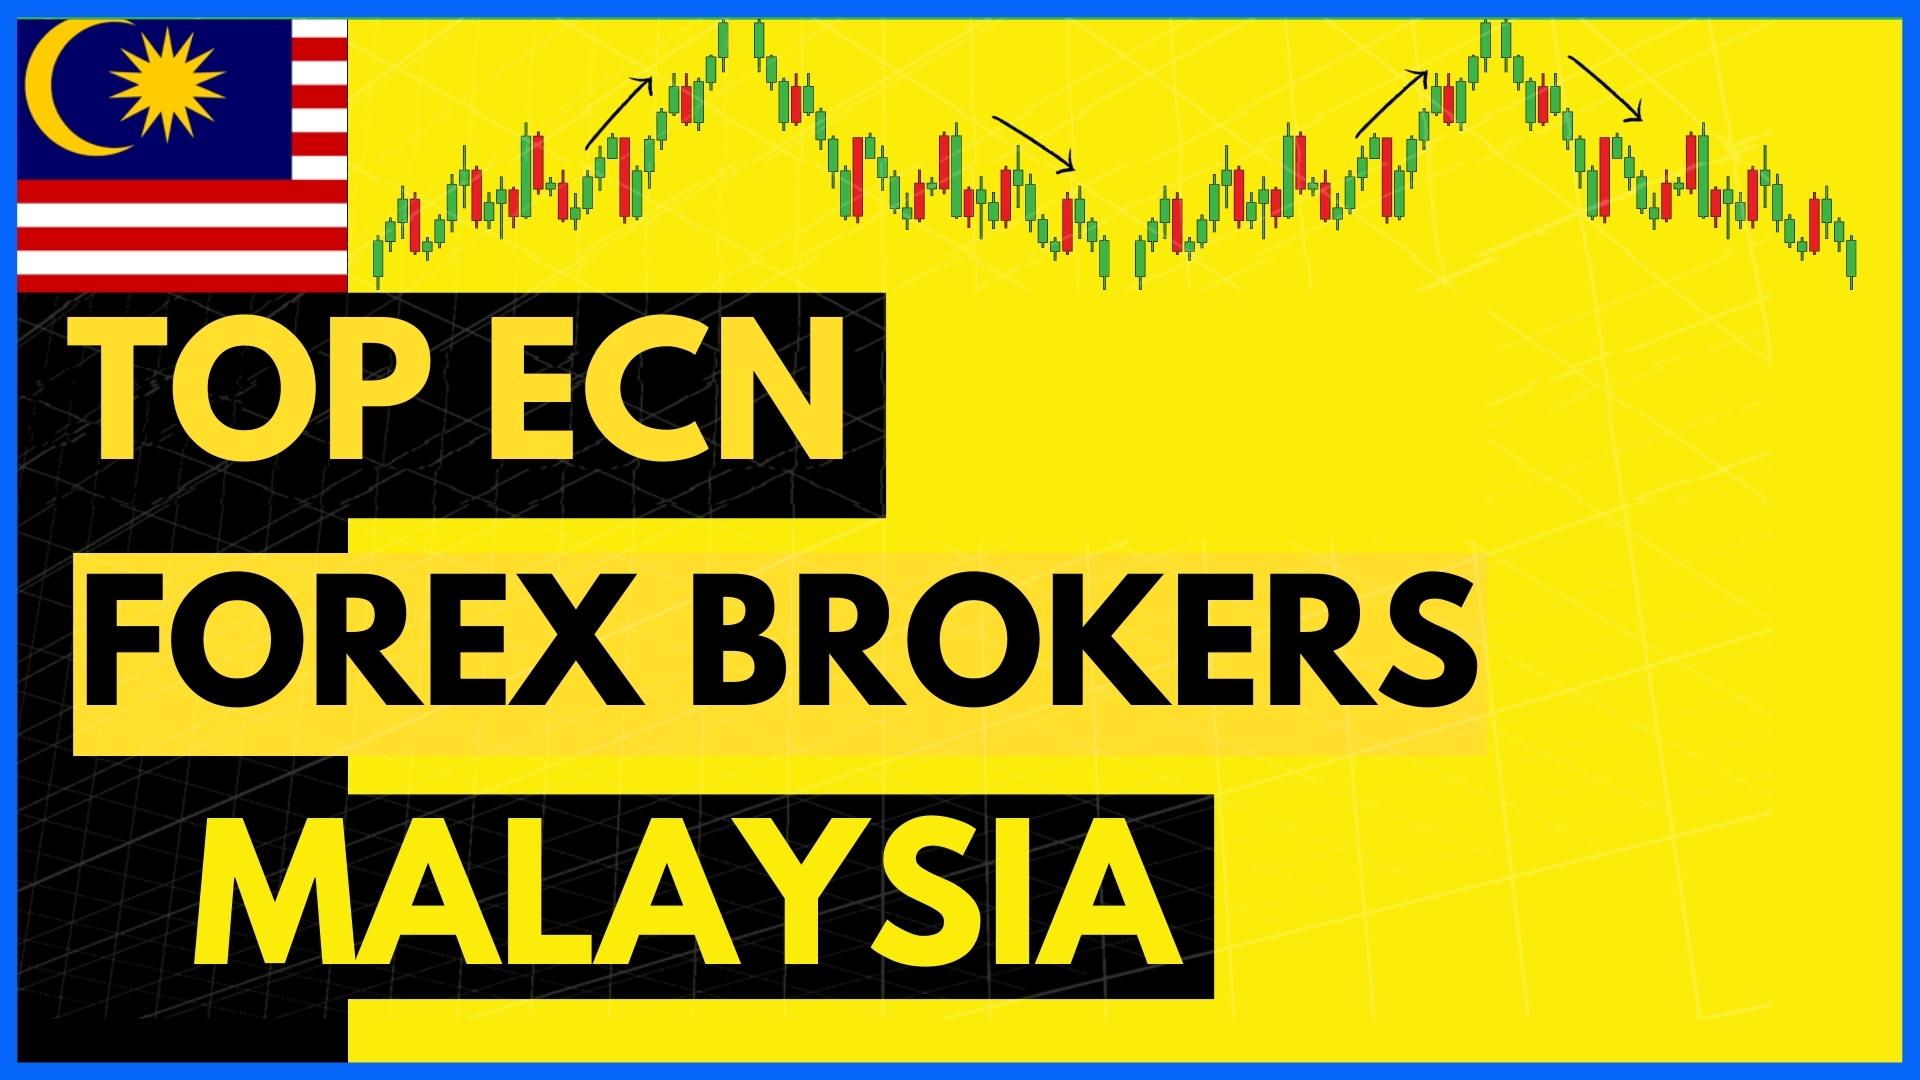 Top ECN Forex Brokers In Malaysia - Live Forex Trading